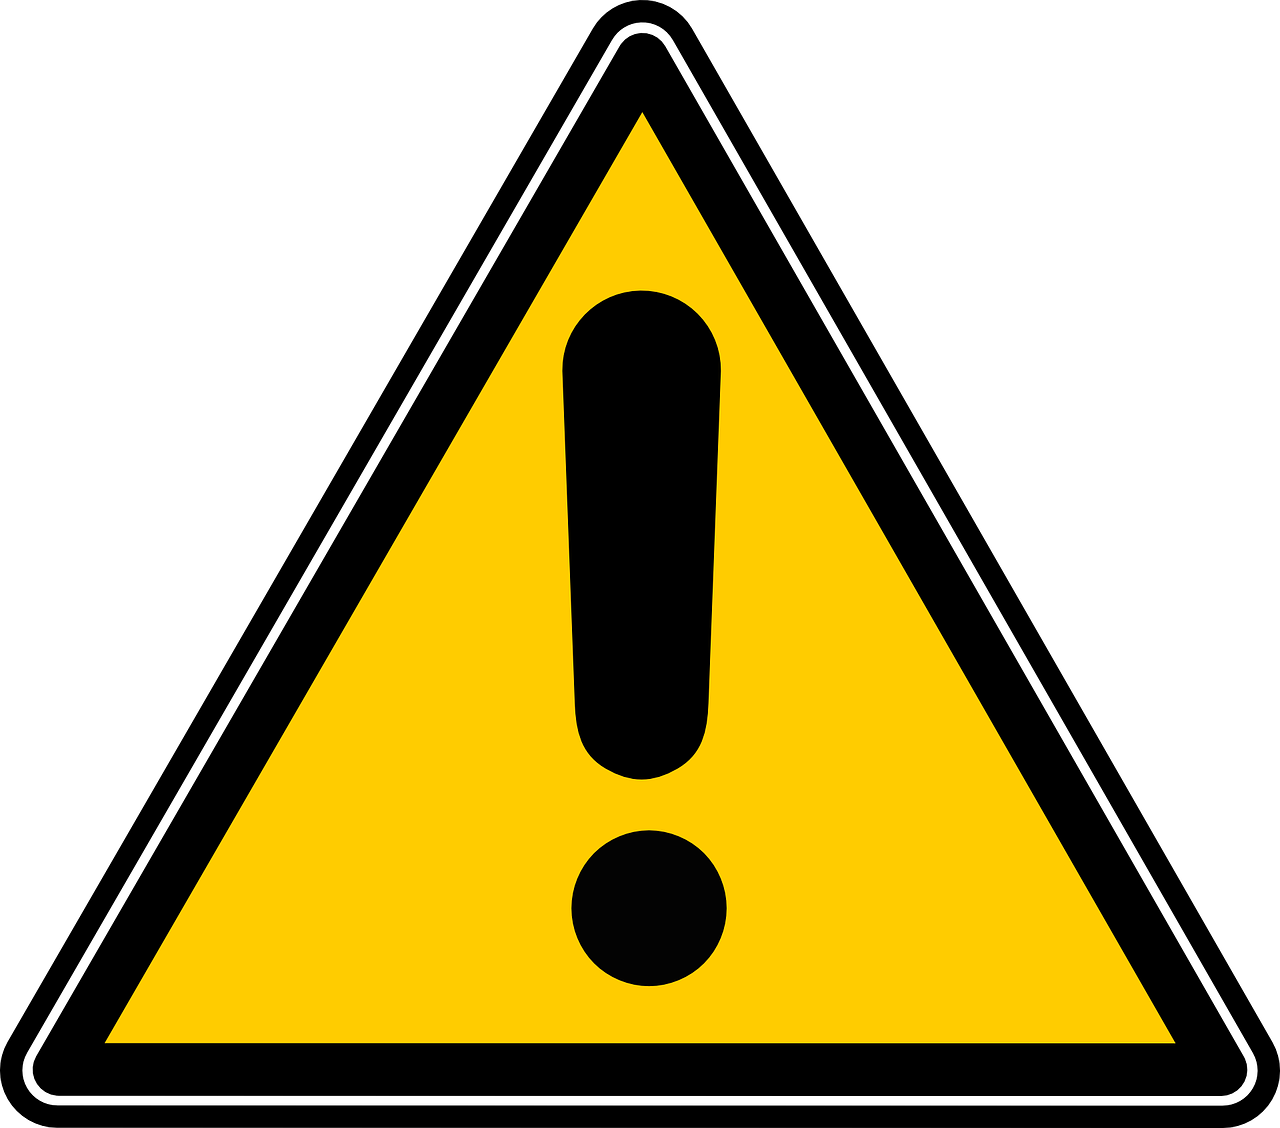 yellow triangle with black border and black exclamation point in the middle 